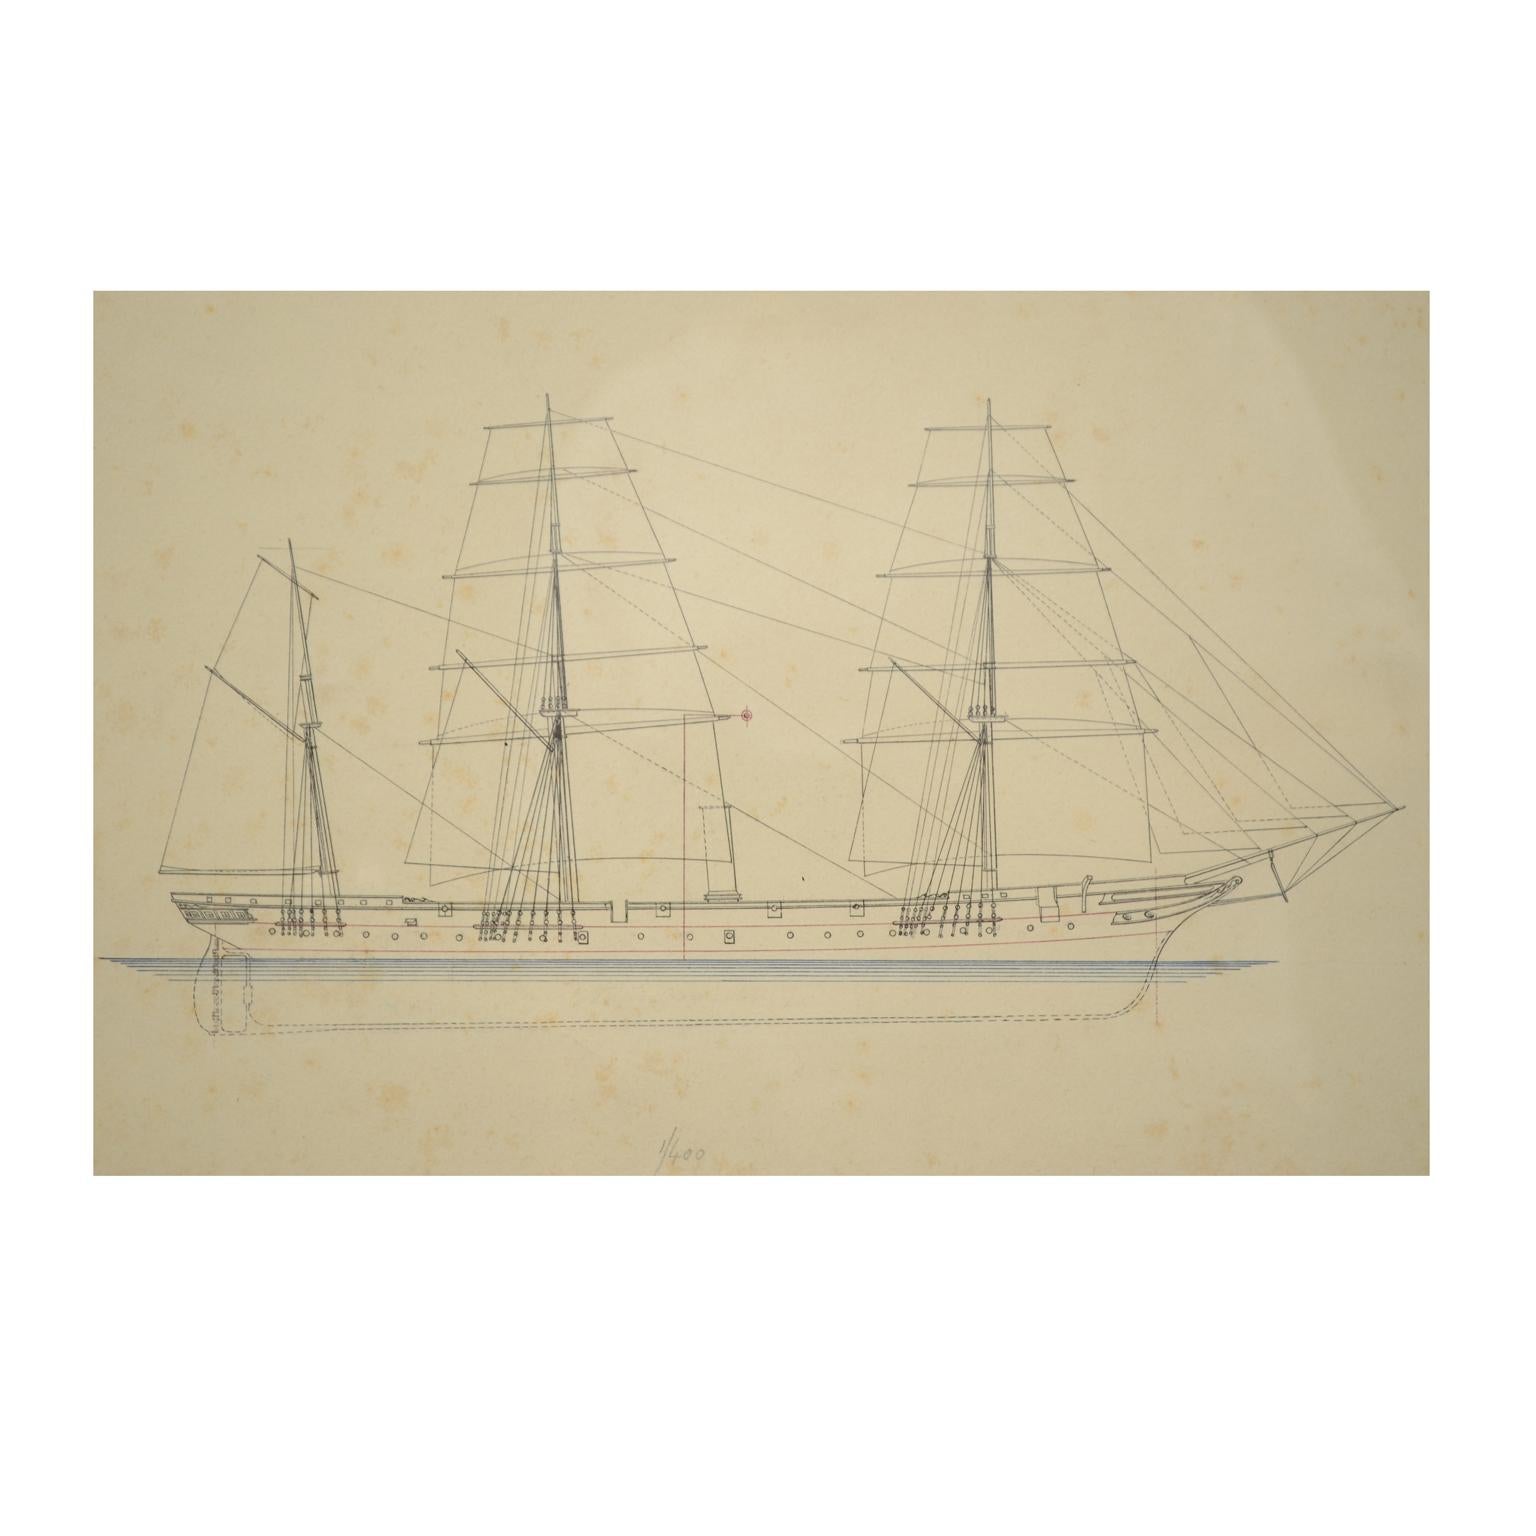 Print no. 1 of 400 Depicting a Nautical Schooner Made in the Mid-19th Century For Sale 1